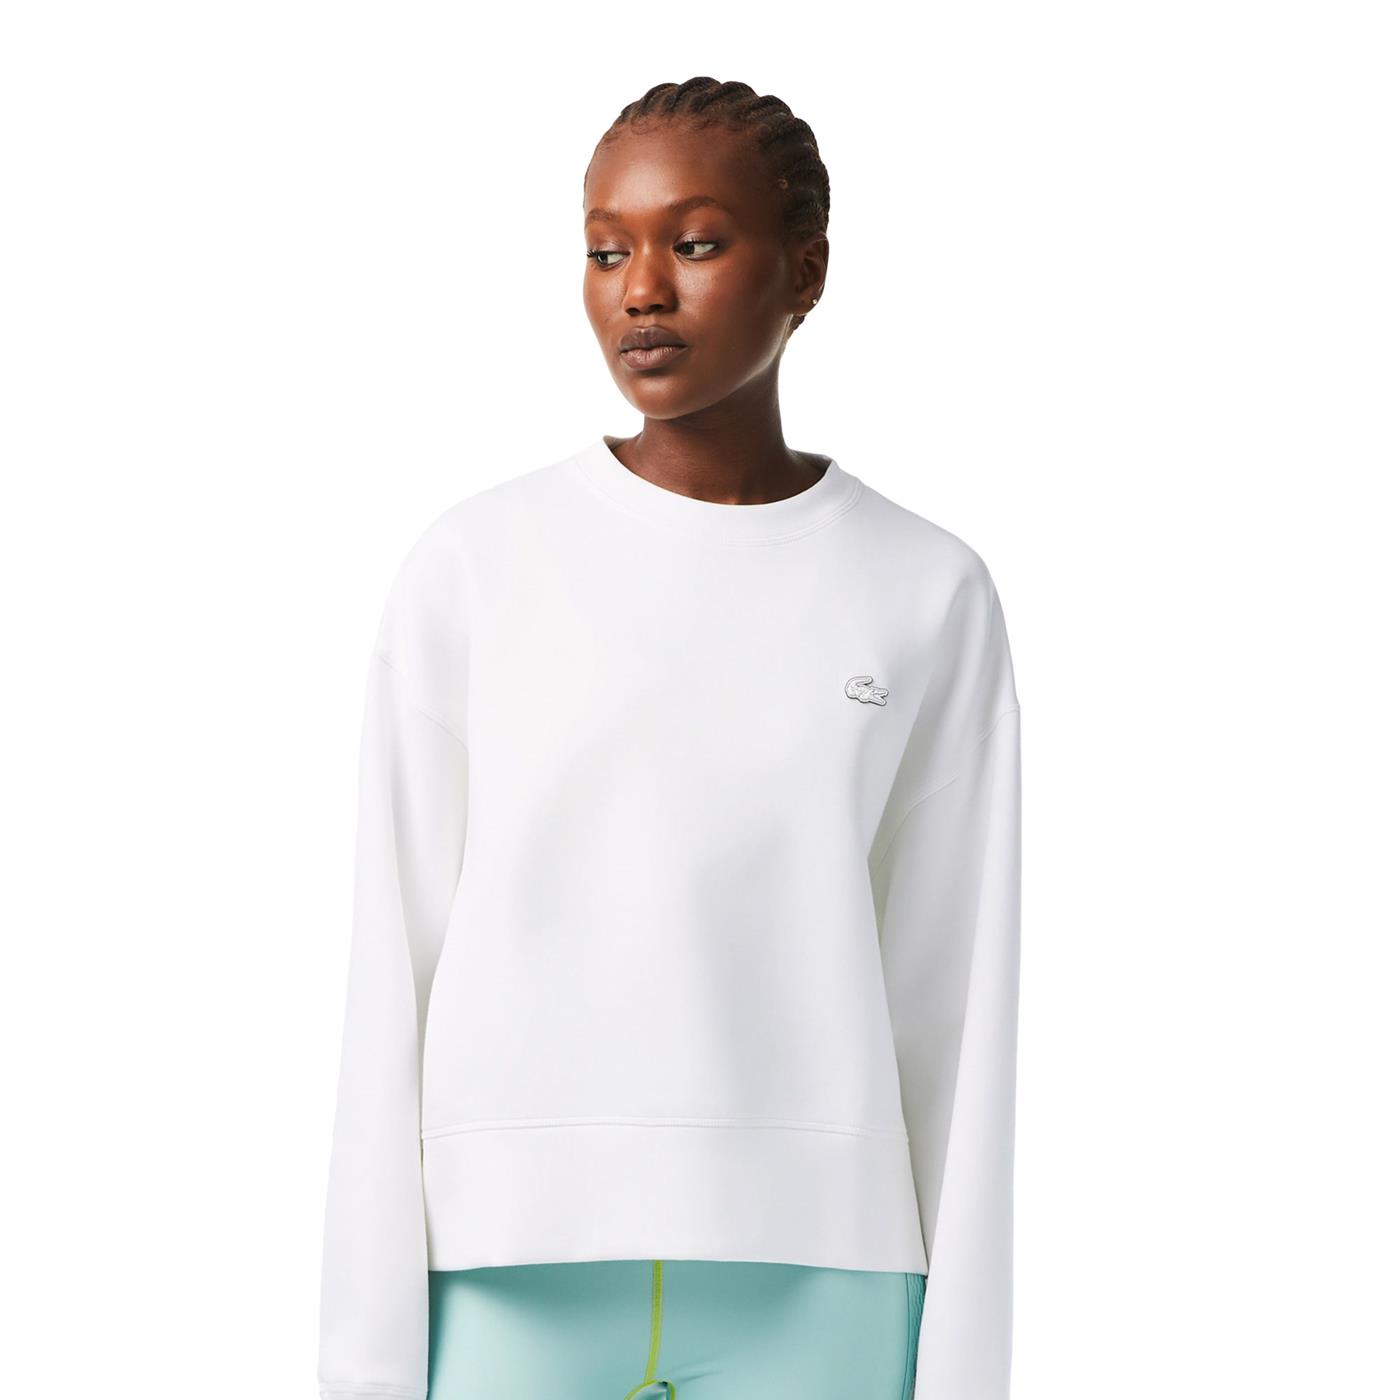 D.Franklin Embroidery Logo Cropped Crew Neck Sweatshirt